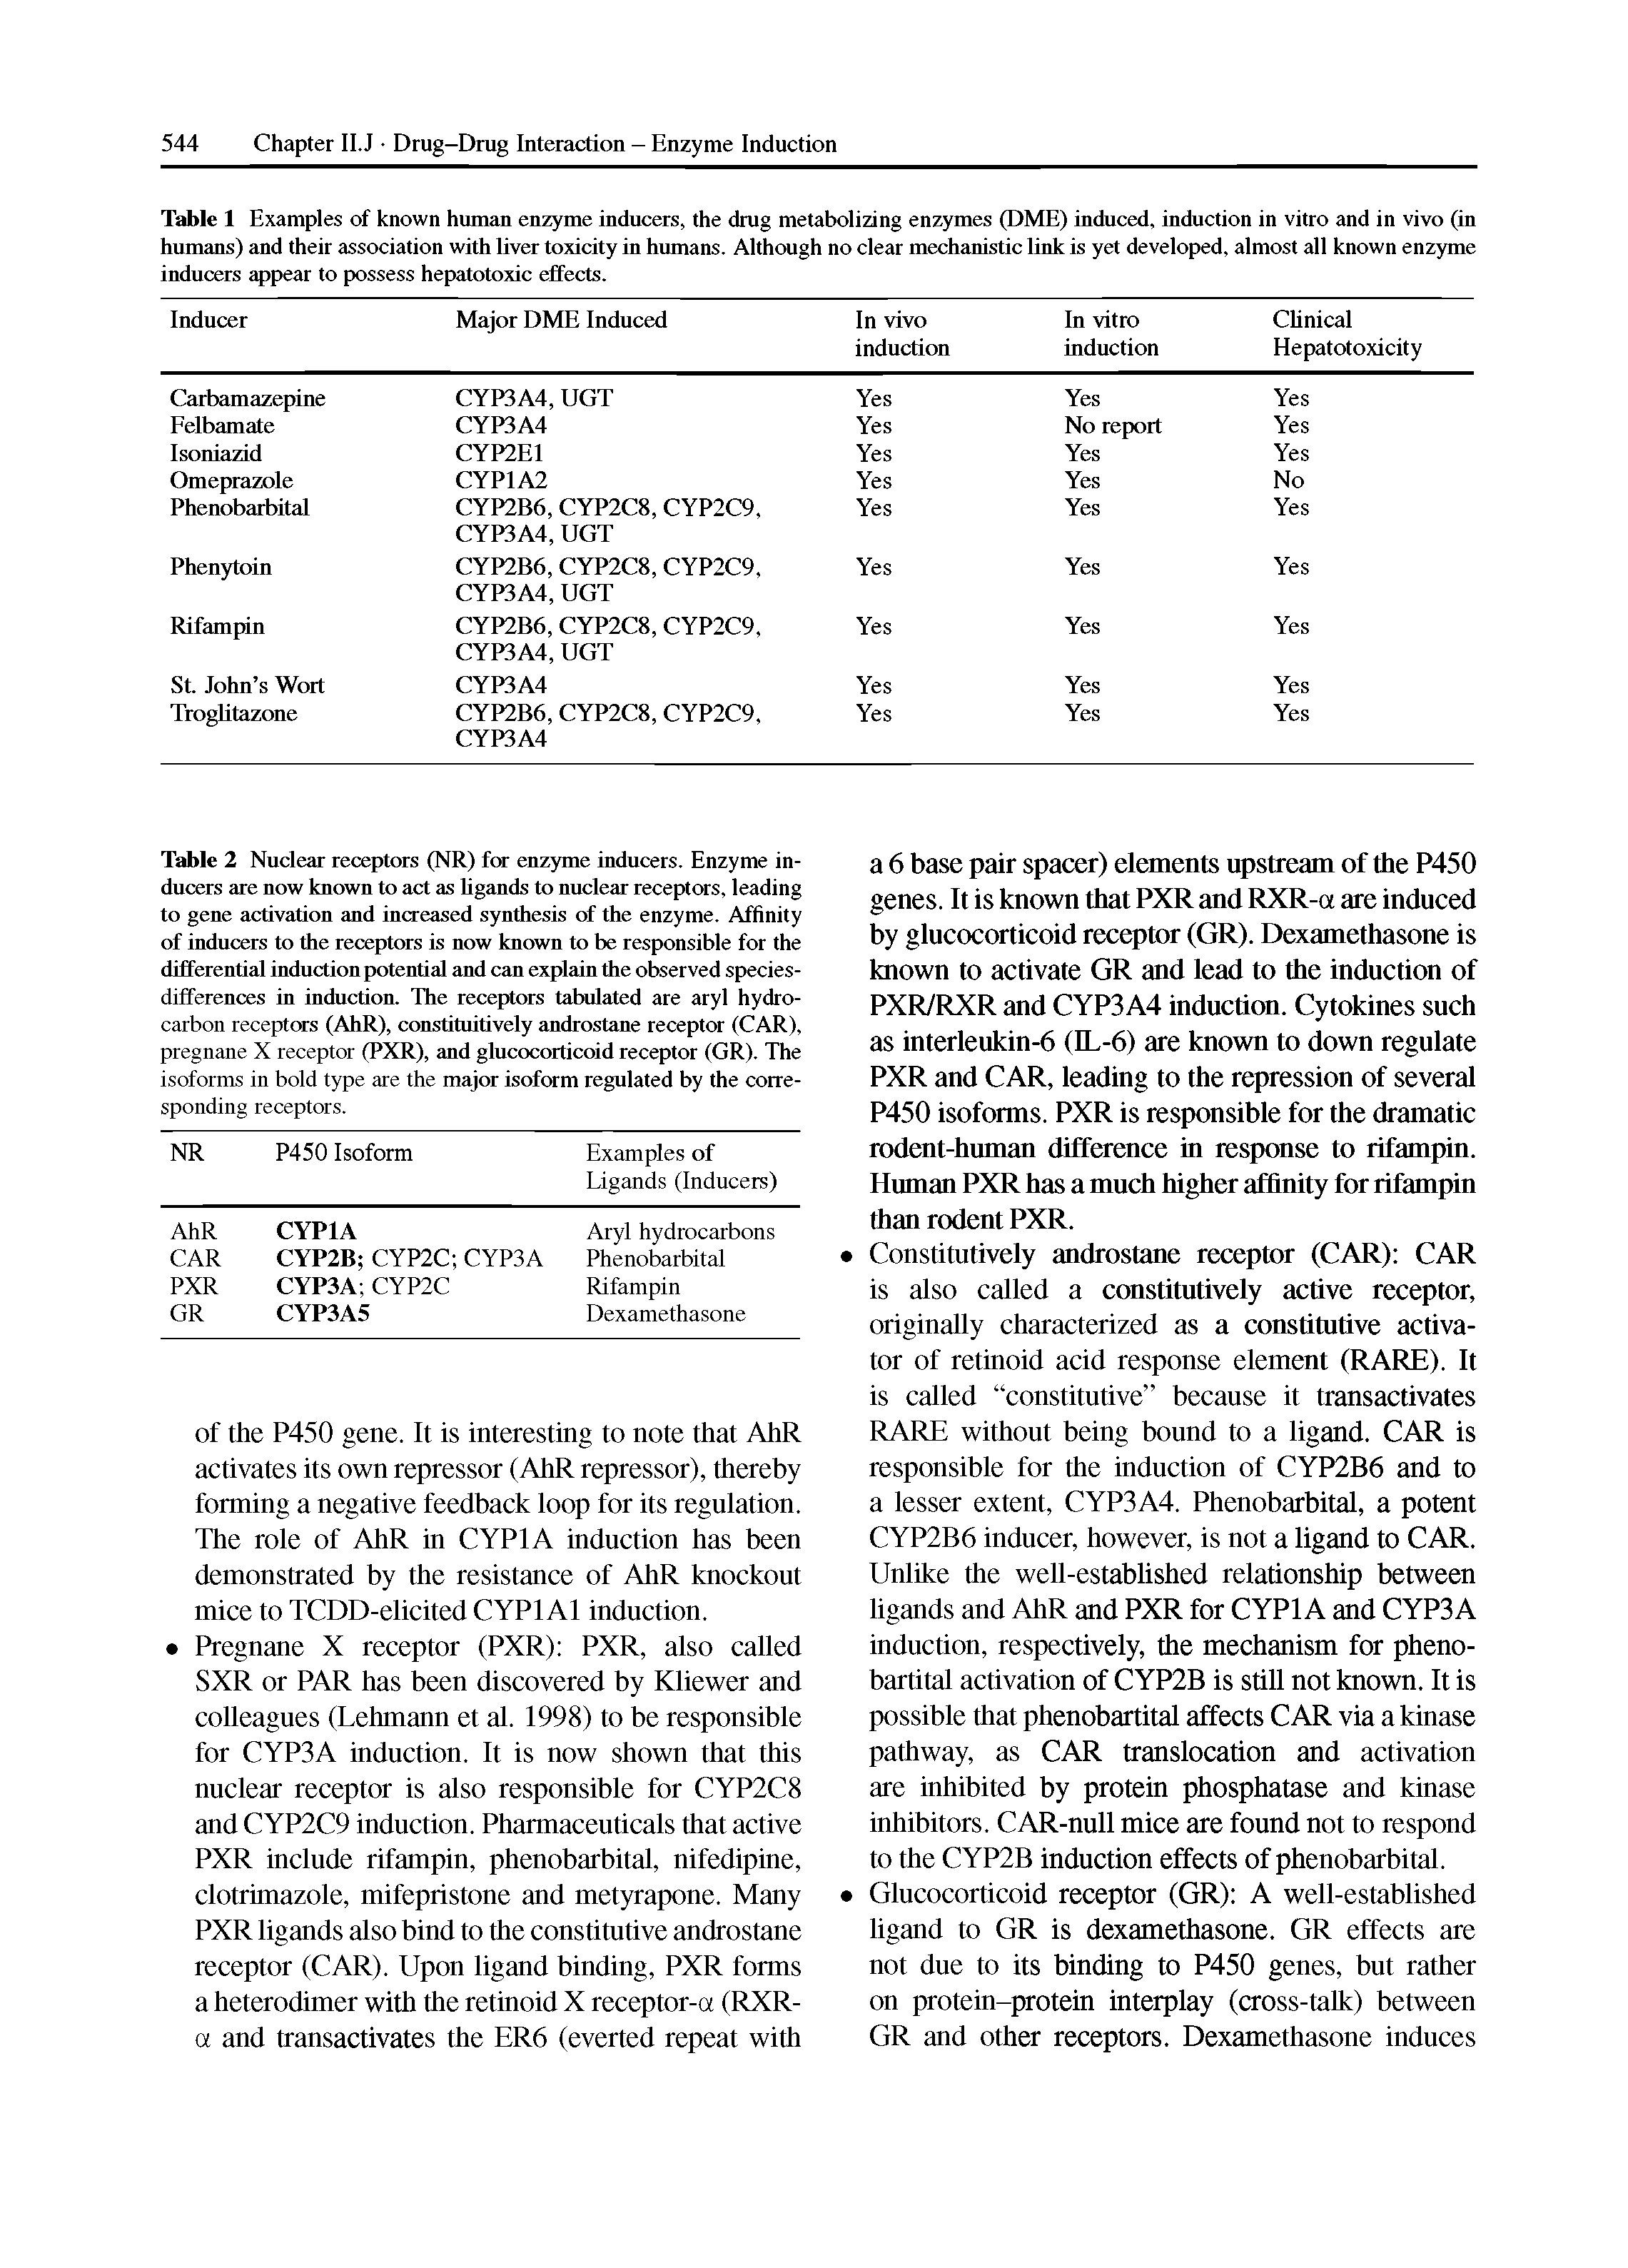 Table 2 Nuclear receptors (NR) for enzyme inducers. Enzyme inducers are now known to act as ligands to nuclear receptors, leading to gene activation and increased synthesis of the enzyme. Affinity of inducers to die receptors is now known to be responsible for the differential induction potential and can explain die observed species-differences in induction. The receptors tabulated are aryl hydrocarbon receptors (AhR), constituitively androstane receptor (CAR), pregnane X receptor (PXR), and glucocorticoid receptor (GR). The isoforms in bold type are the major isoform regulated by the corresponding receptors.